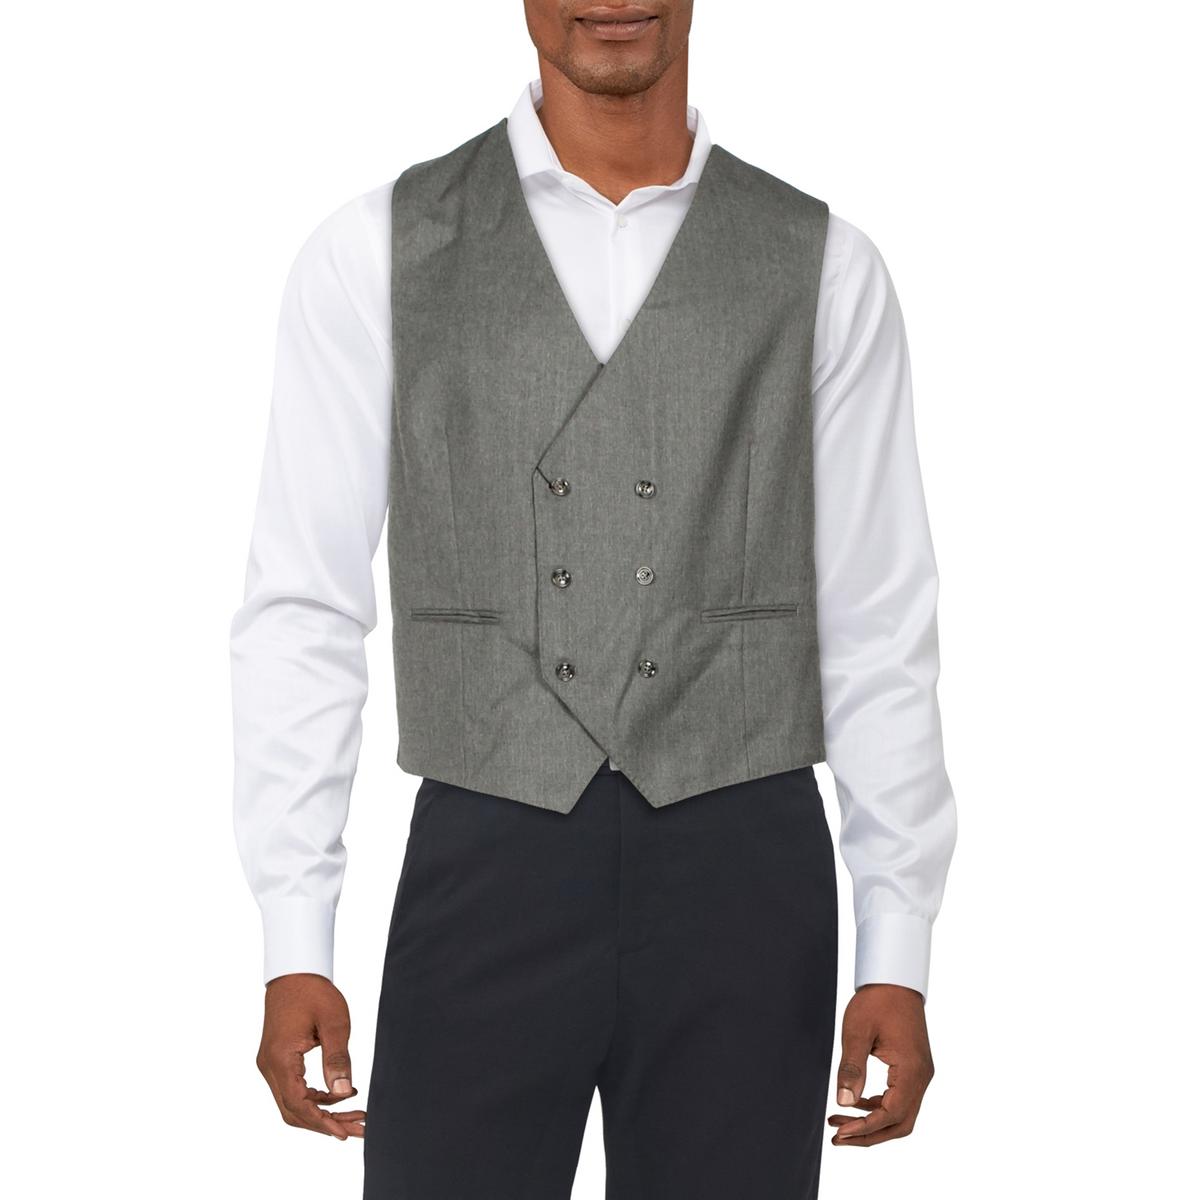 TAYION BY MONTEE HOLLAND Mens Classic Fit Heathered Suit Vest